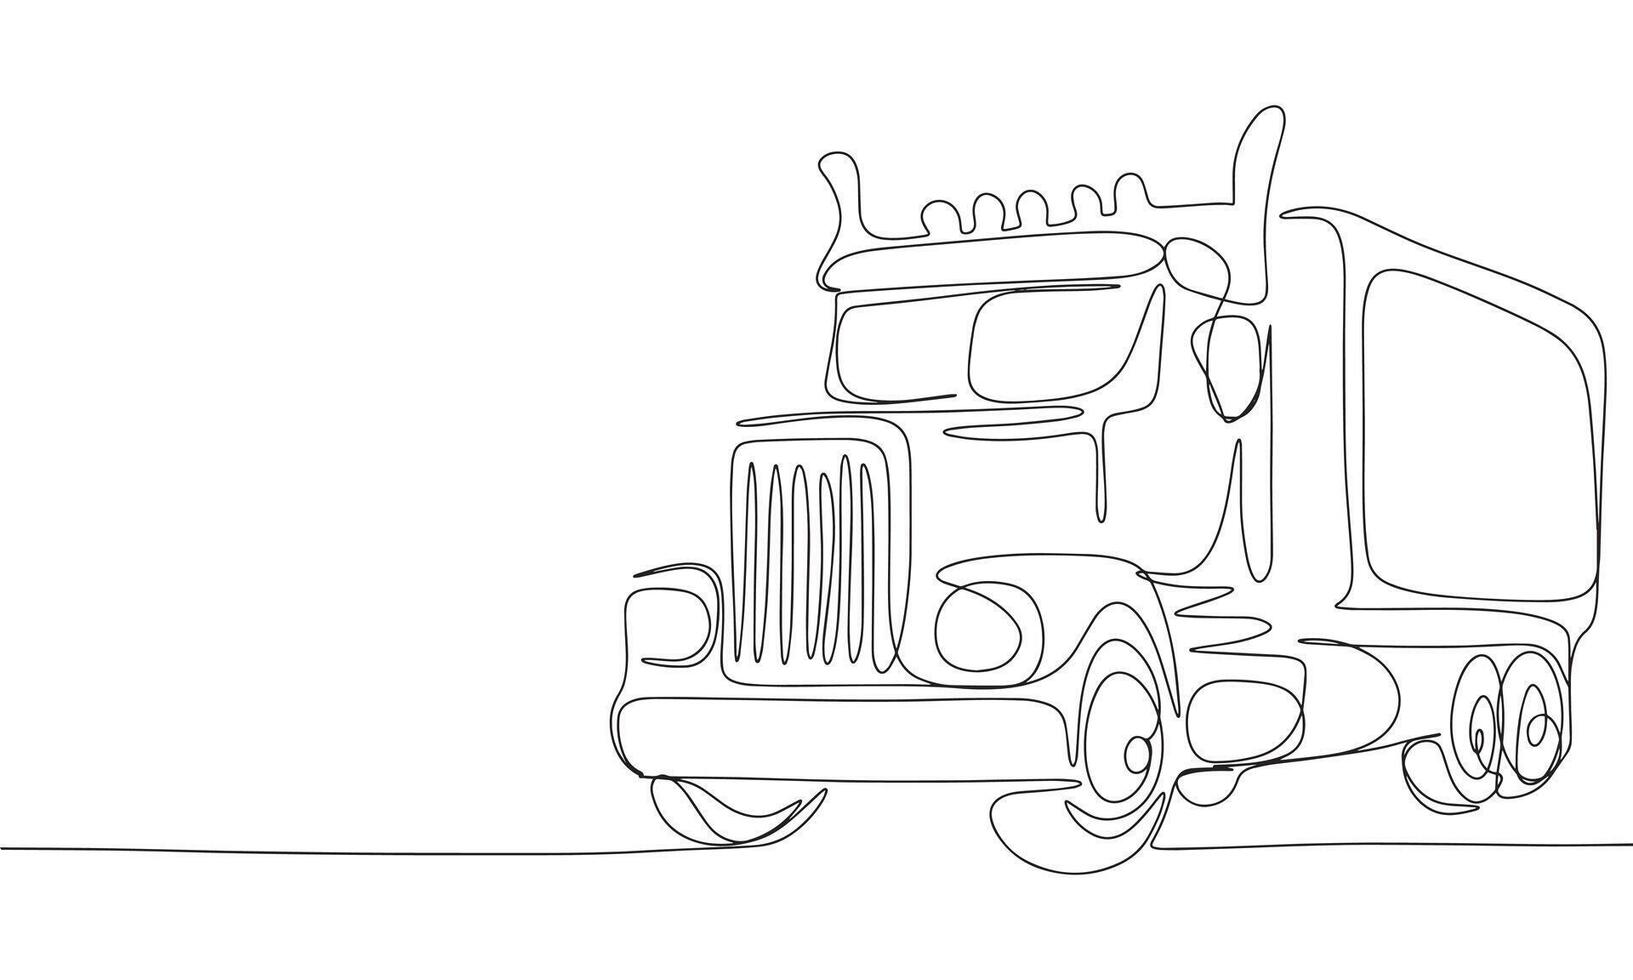 Lorry one line continuous. Line art Track. Hand drawn art. vector